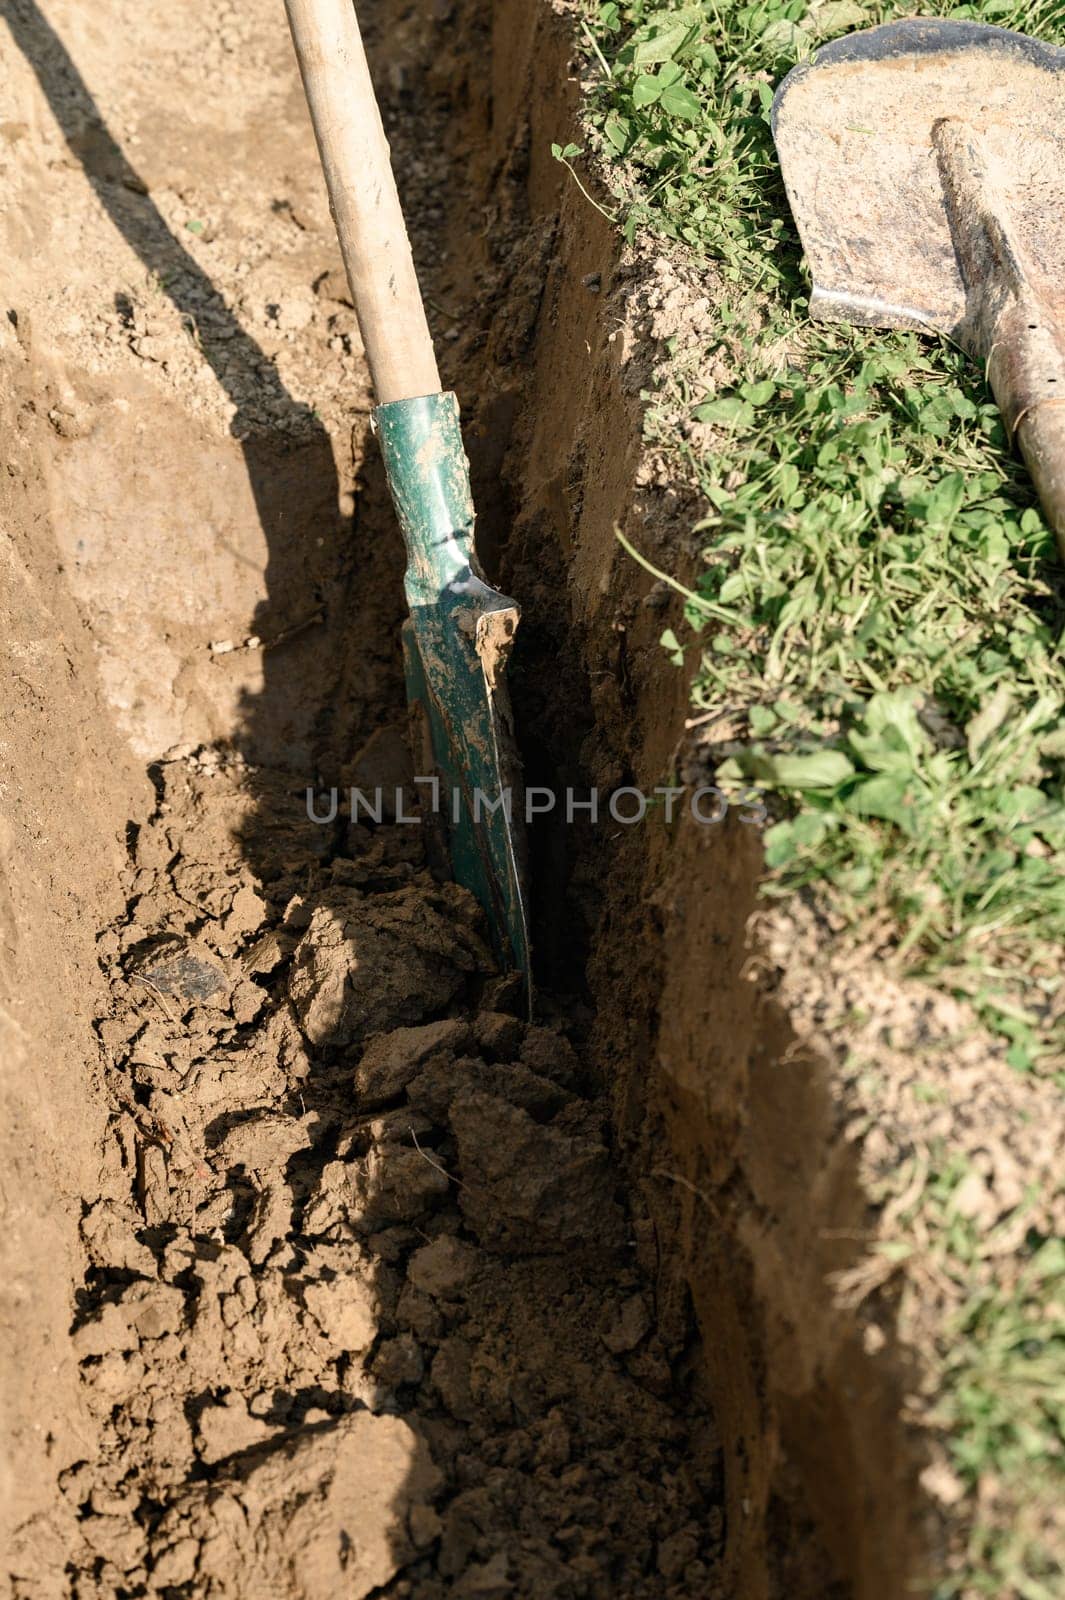 A man shovels a trench for drainage and sewage, close up.